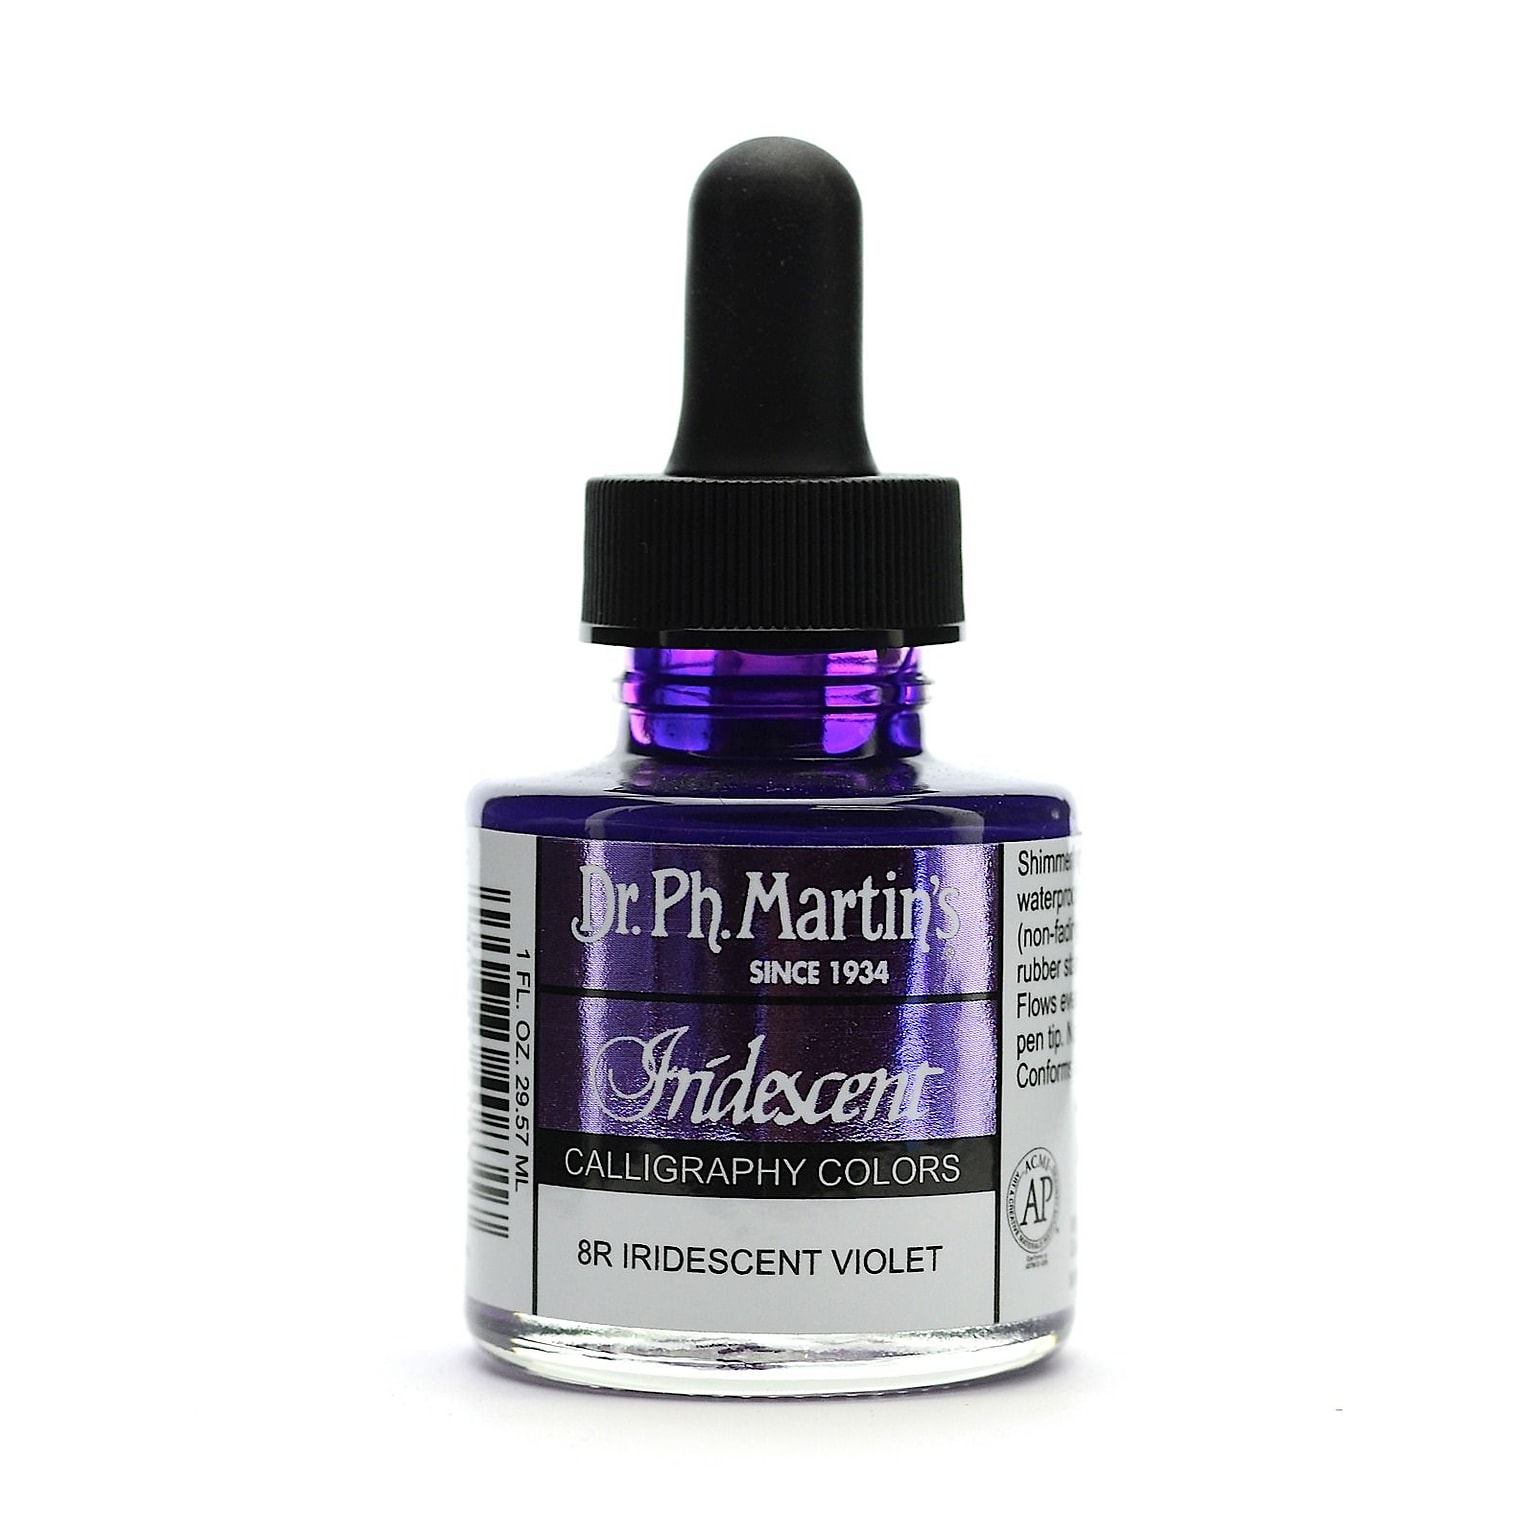 Dr. Ph. MartinS Iridescent Calligraphy Colors 1 Oz. Violet [Pack Of 2] (2PK-400070-8R)